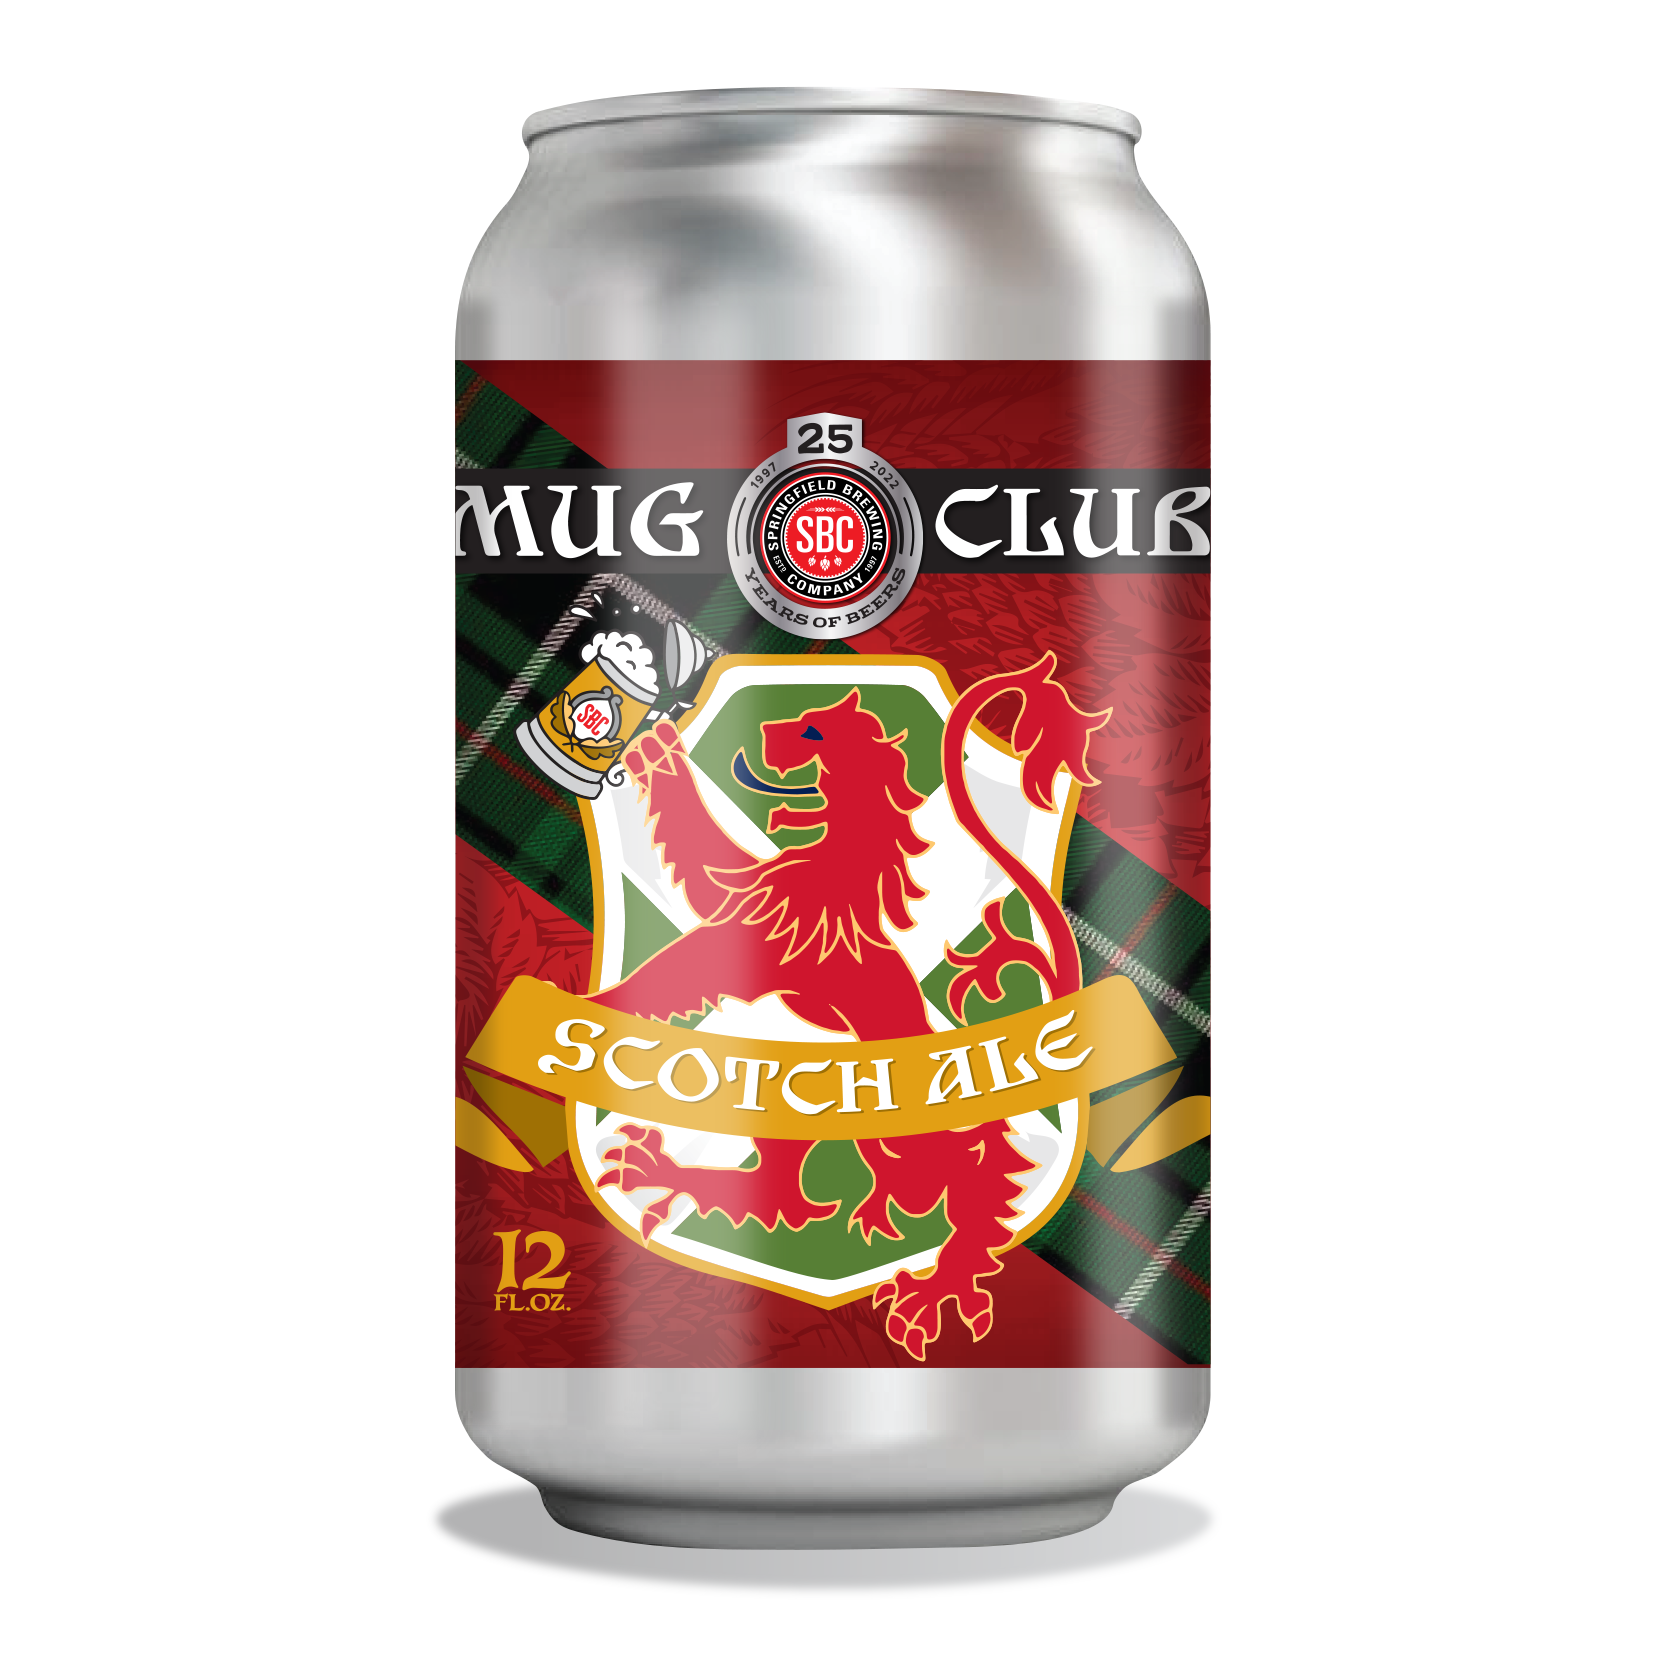 https://brewery.springfieldbrewingco.com/wp-content/uploads/2022/10/MugClubScotchAle_CanWebsite.png